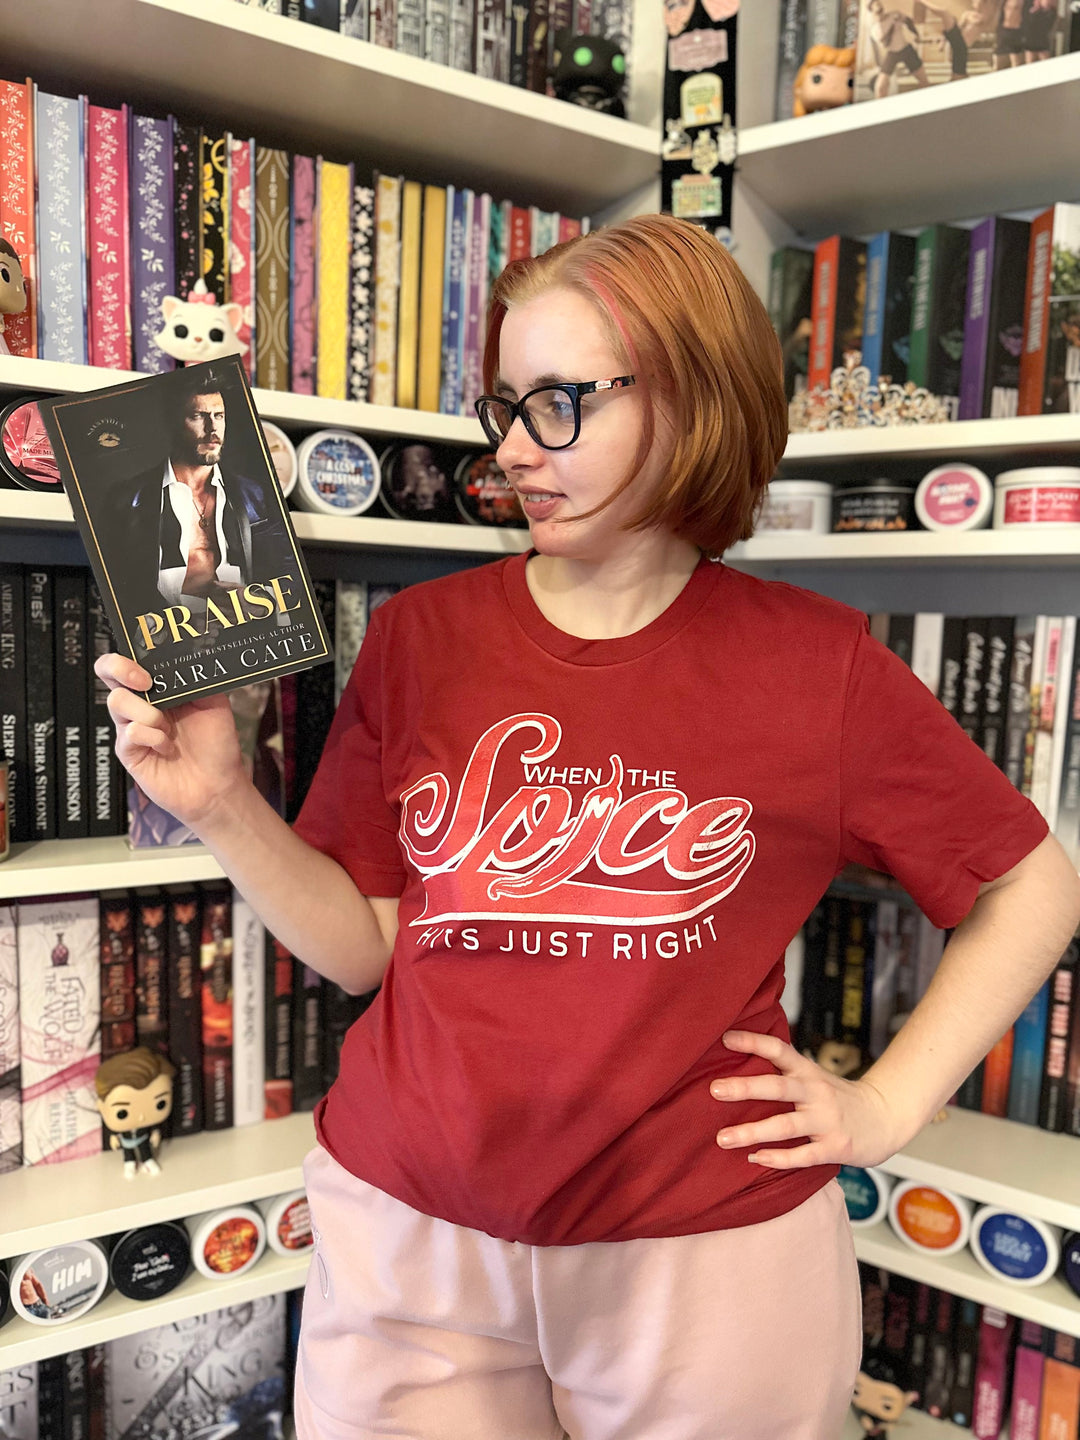 a woman standing in front of a book shelf holding a book